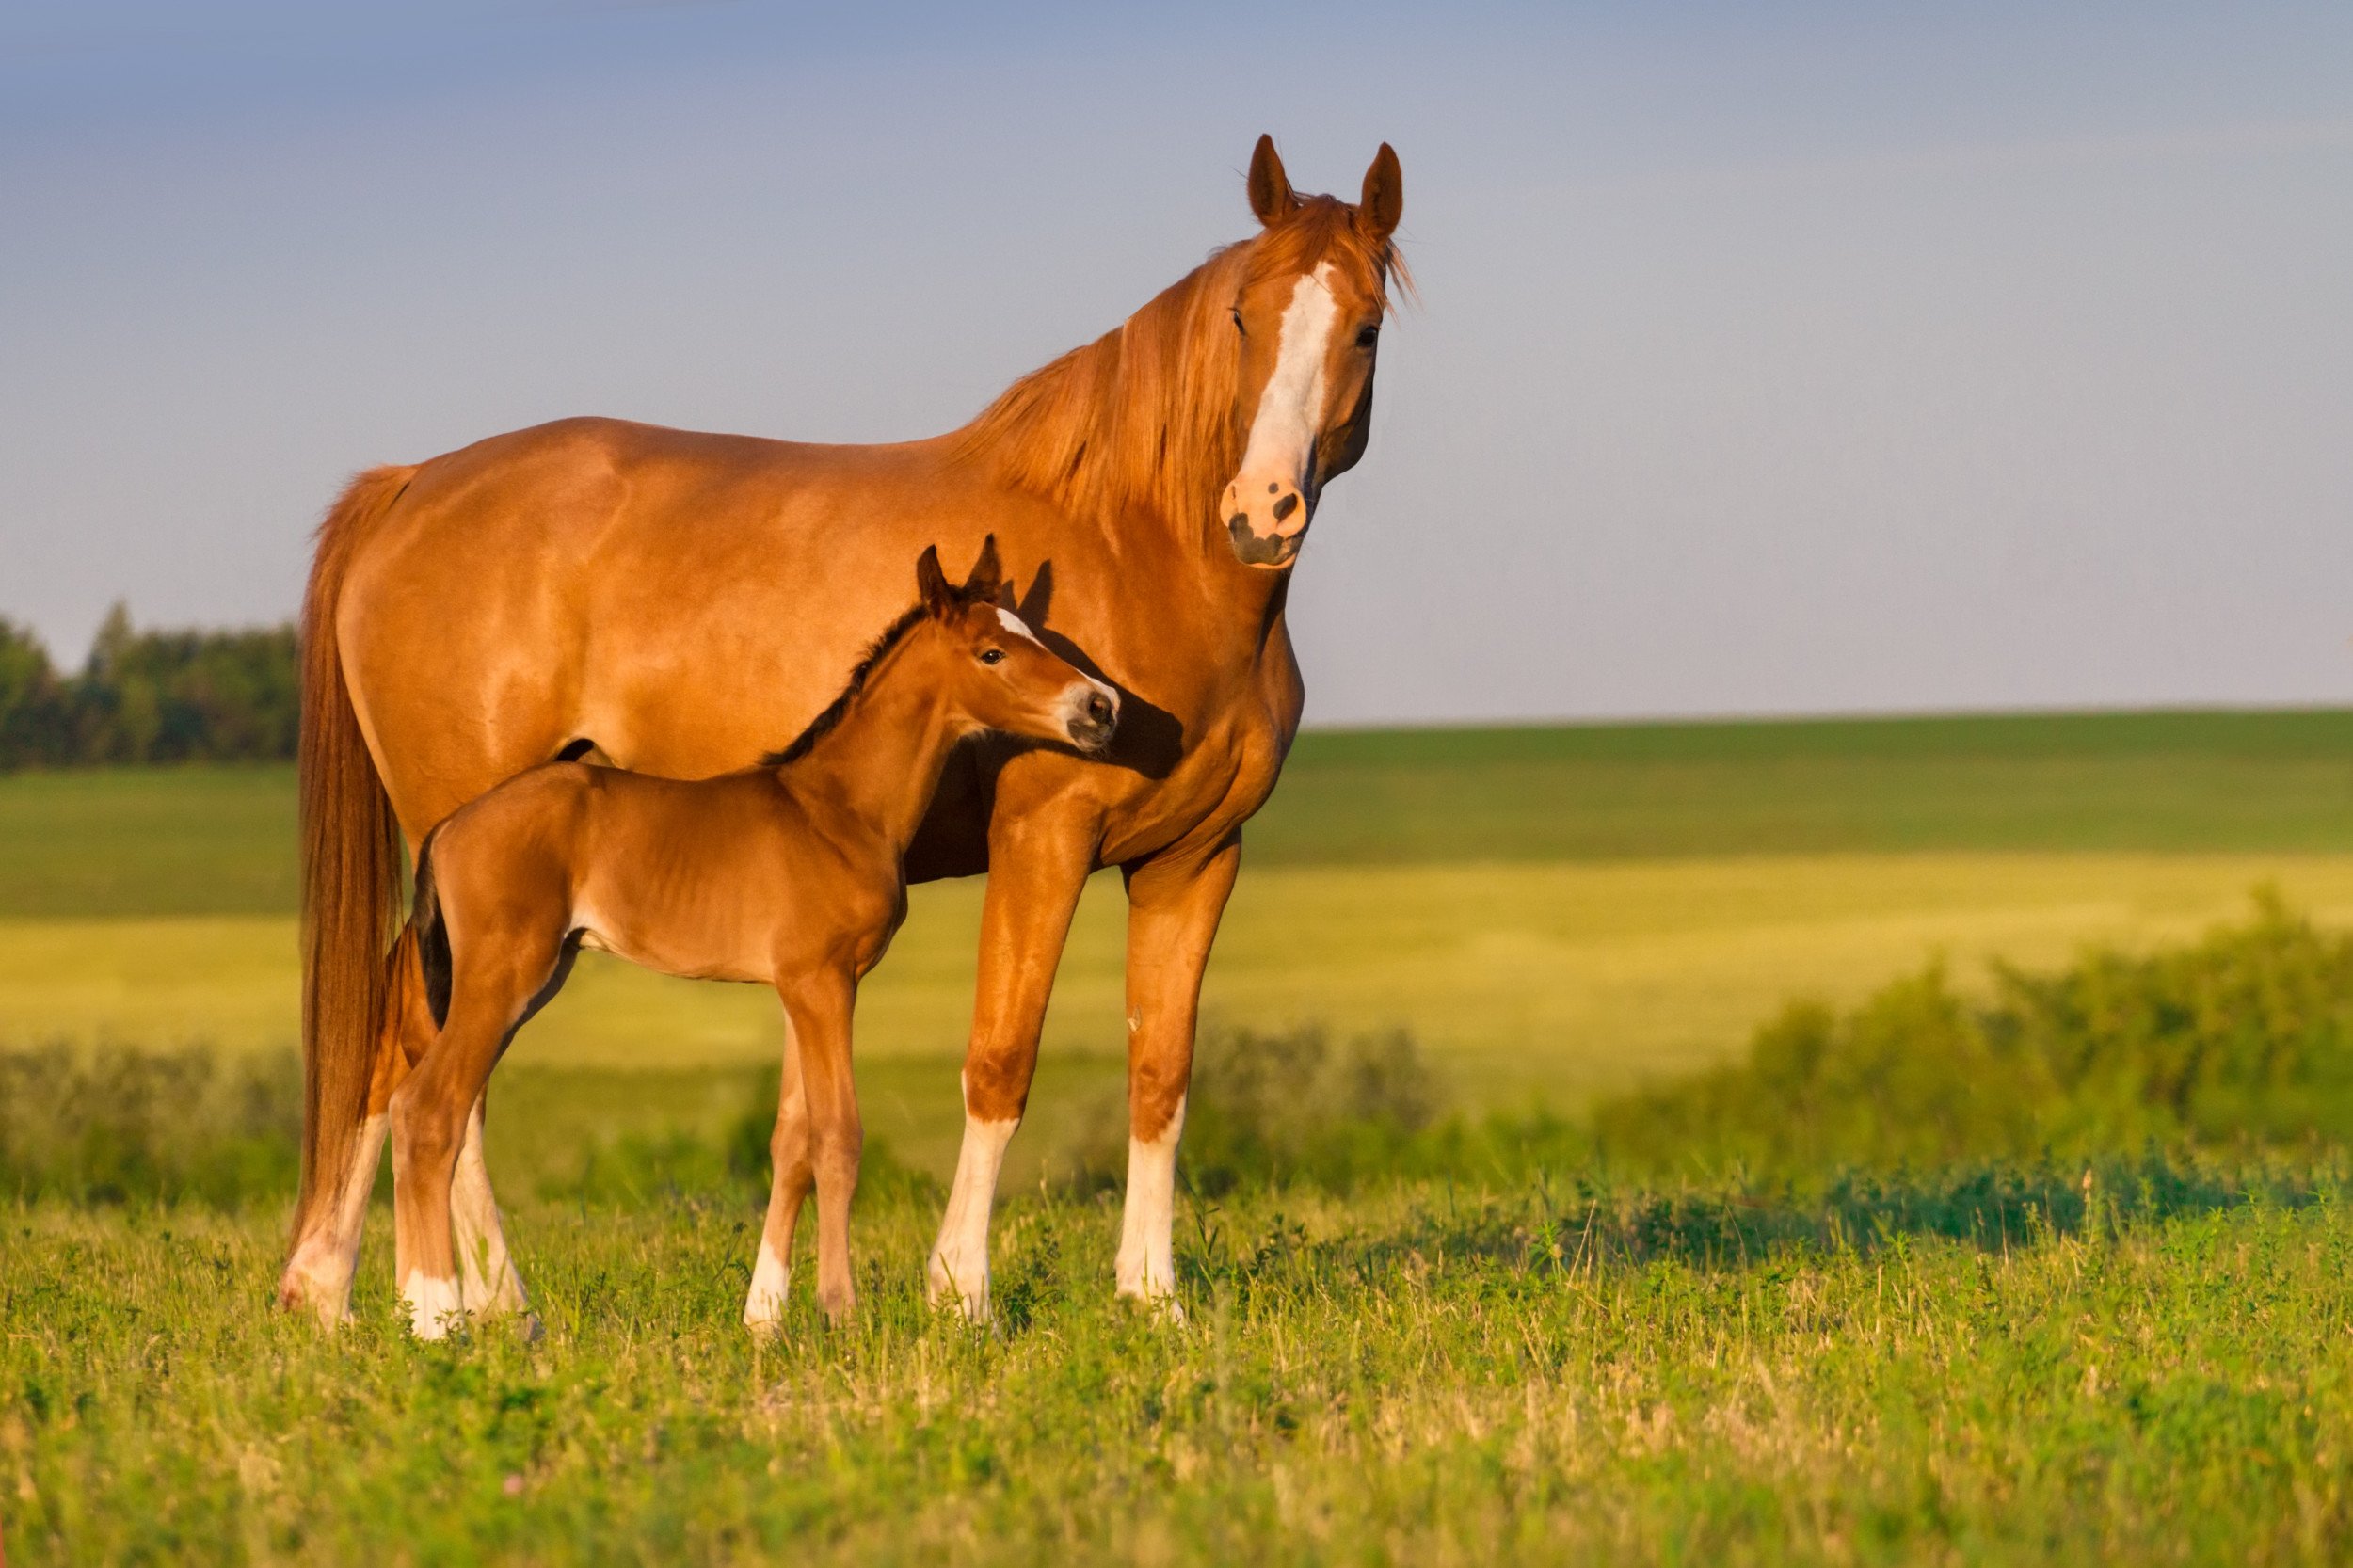 A horse and foal walking in a field